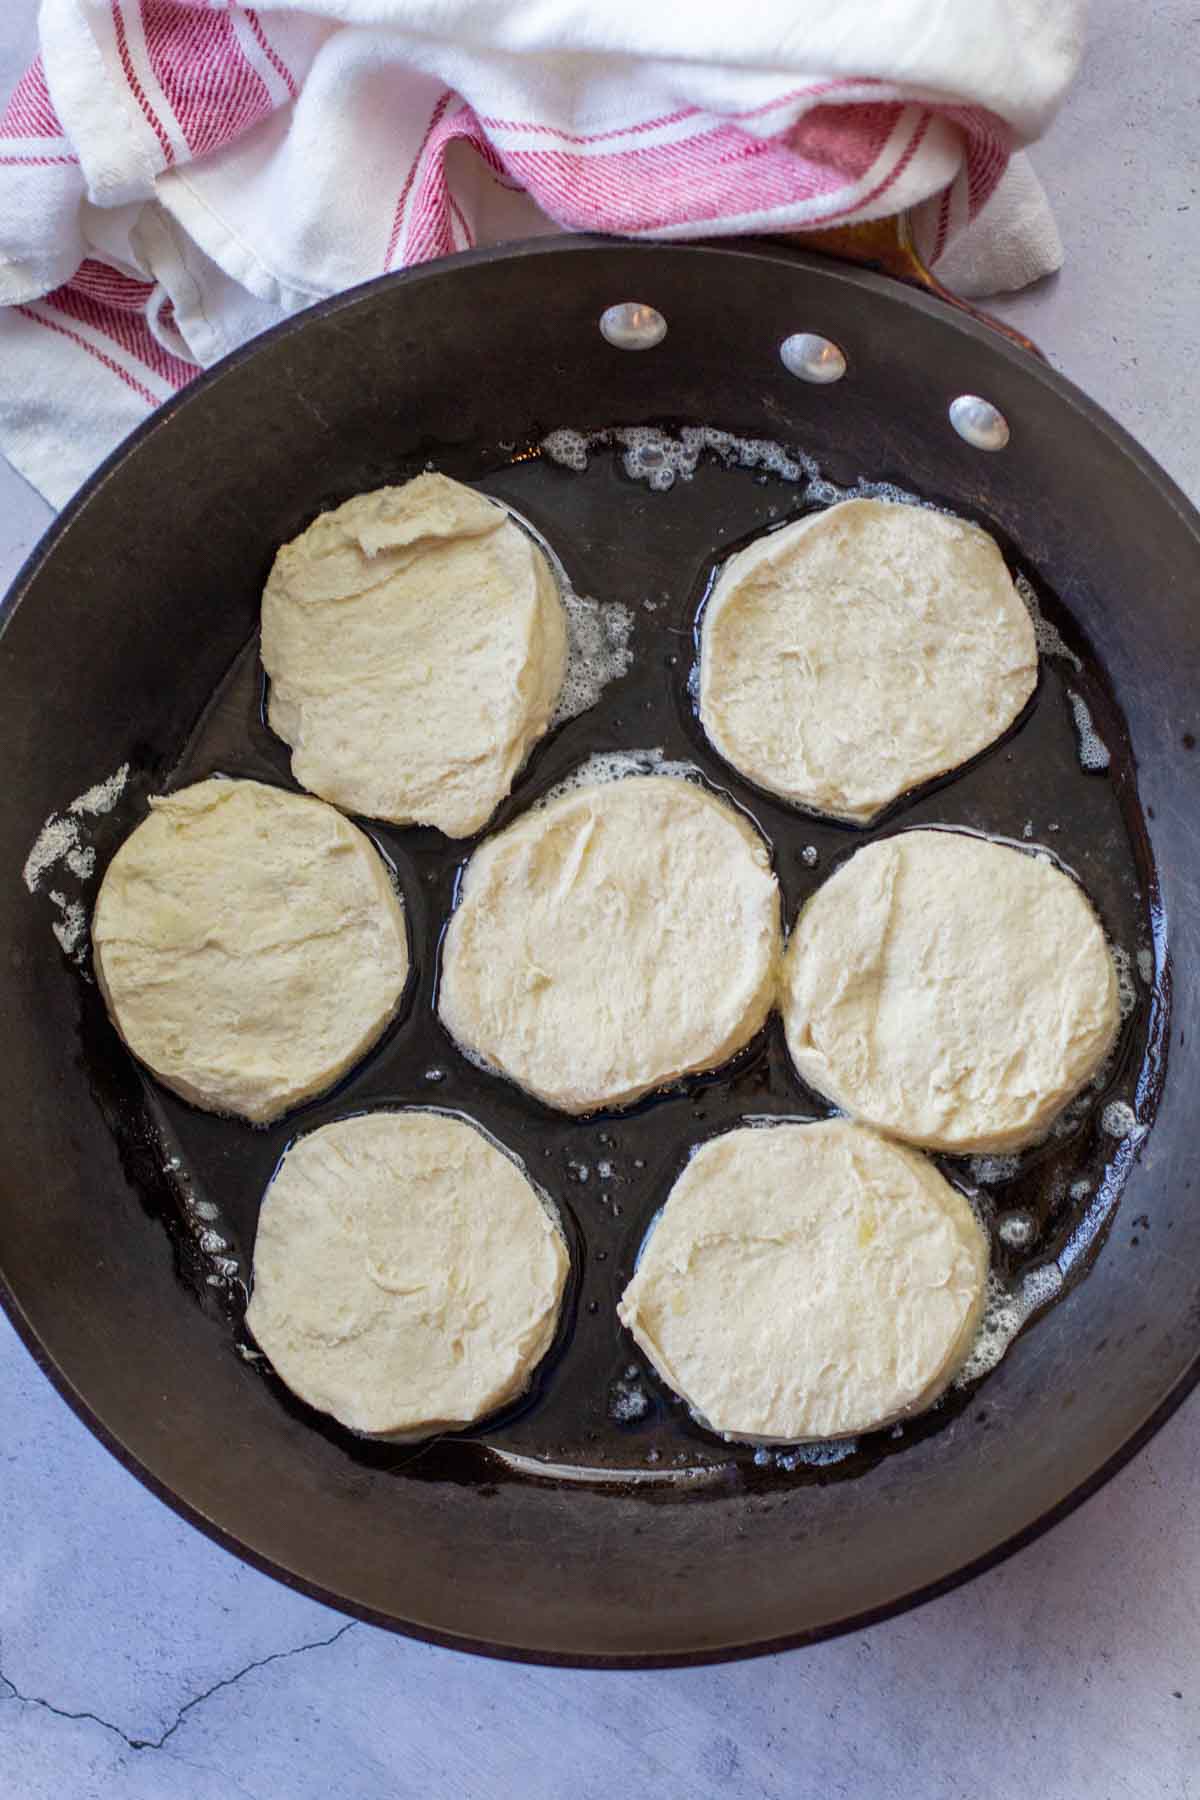 Frying canned biscuits in butter.